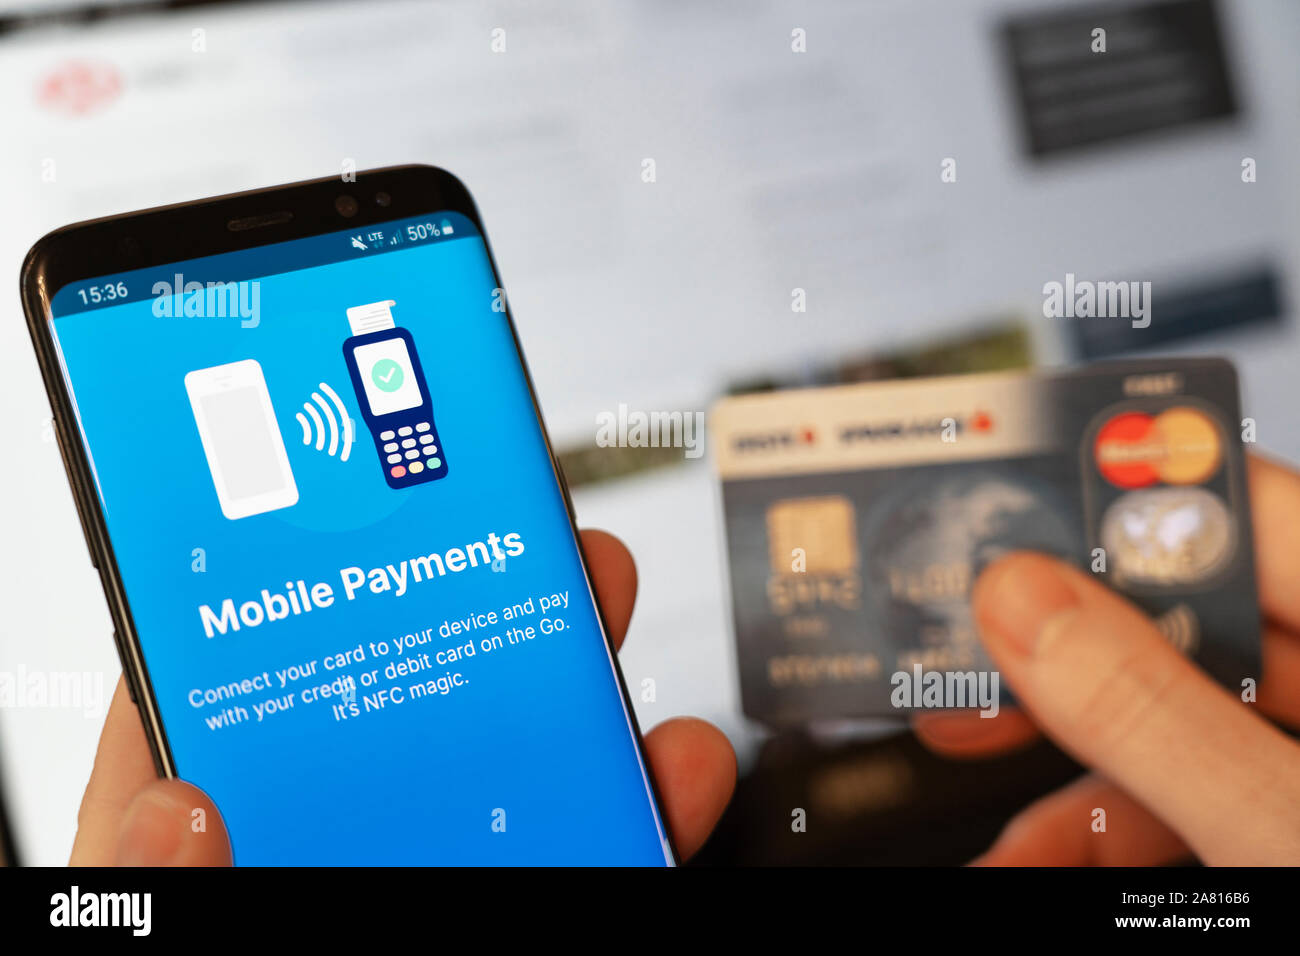 Using a mobile phone to make a credit card payment online. Concept - mobile payments and fraud Stock Photo